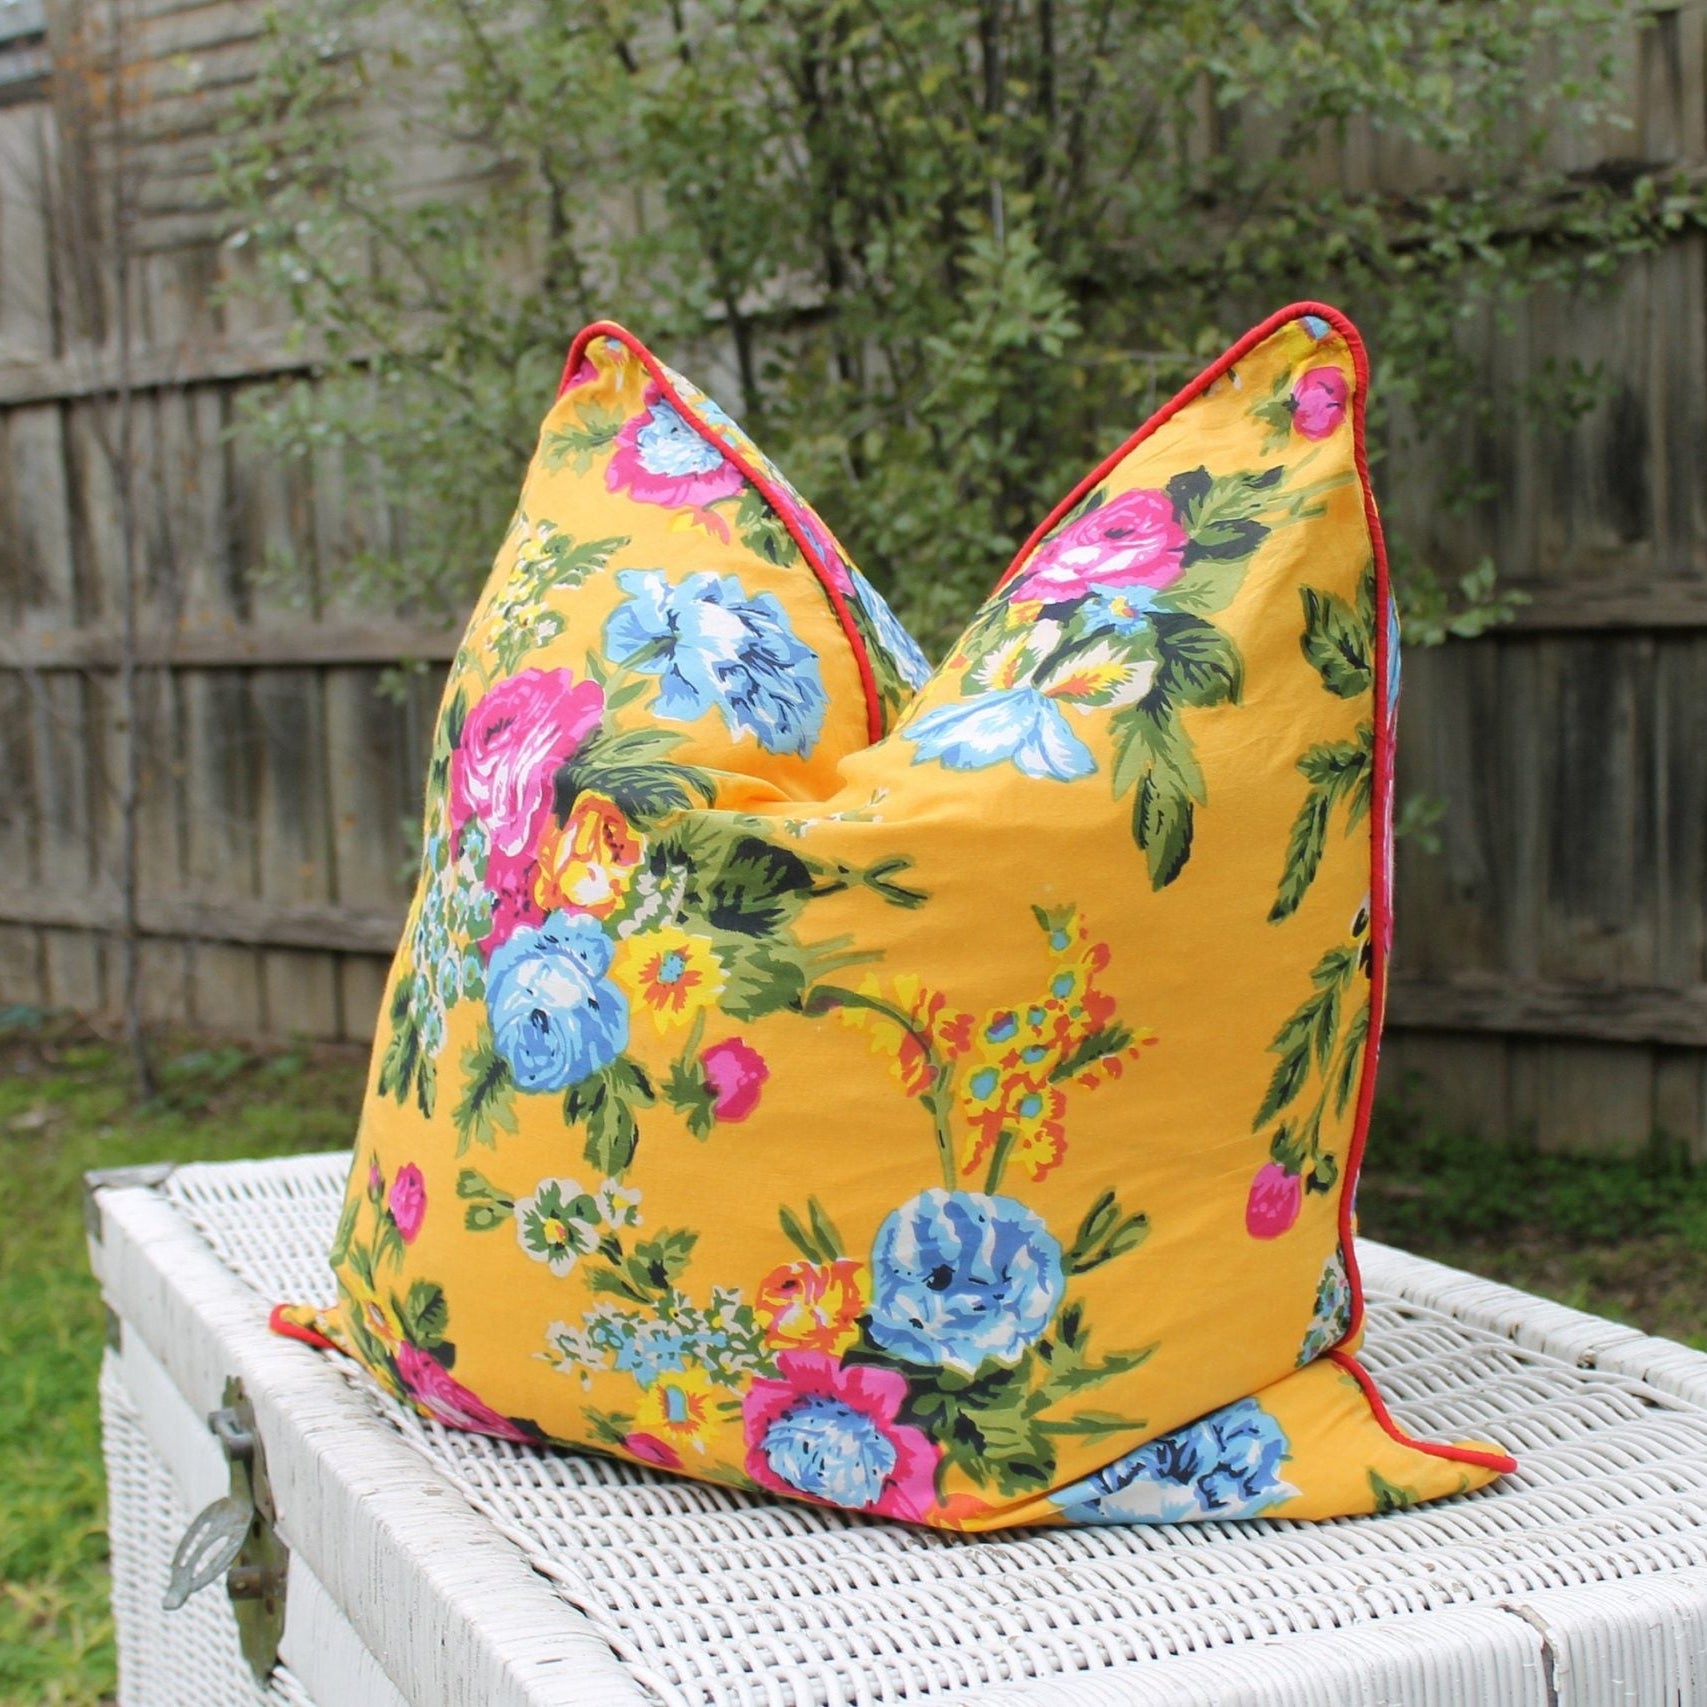 'Cozy Floral Comforts' 100% Handmade Cotton Cushion Cover